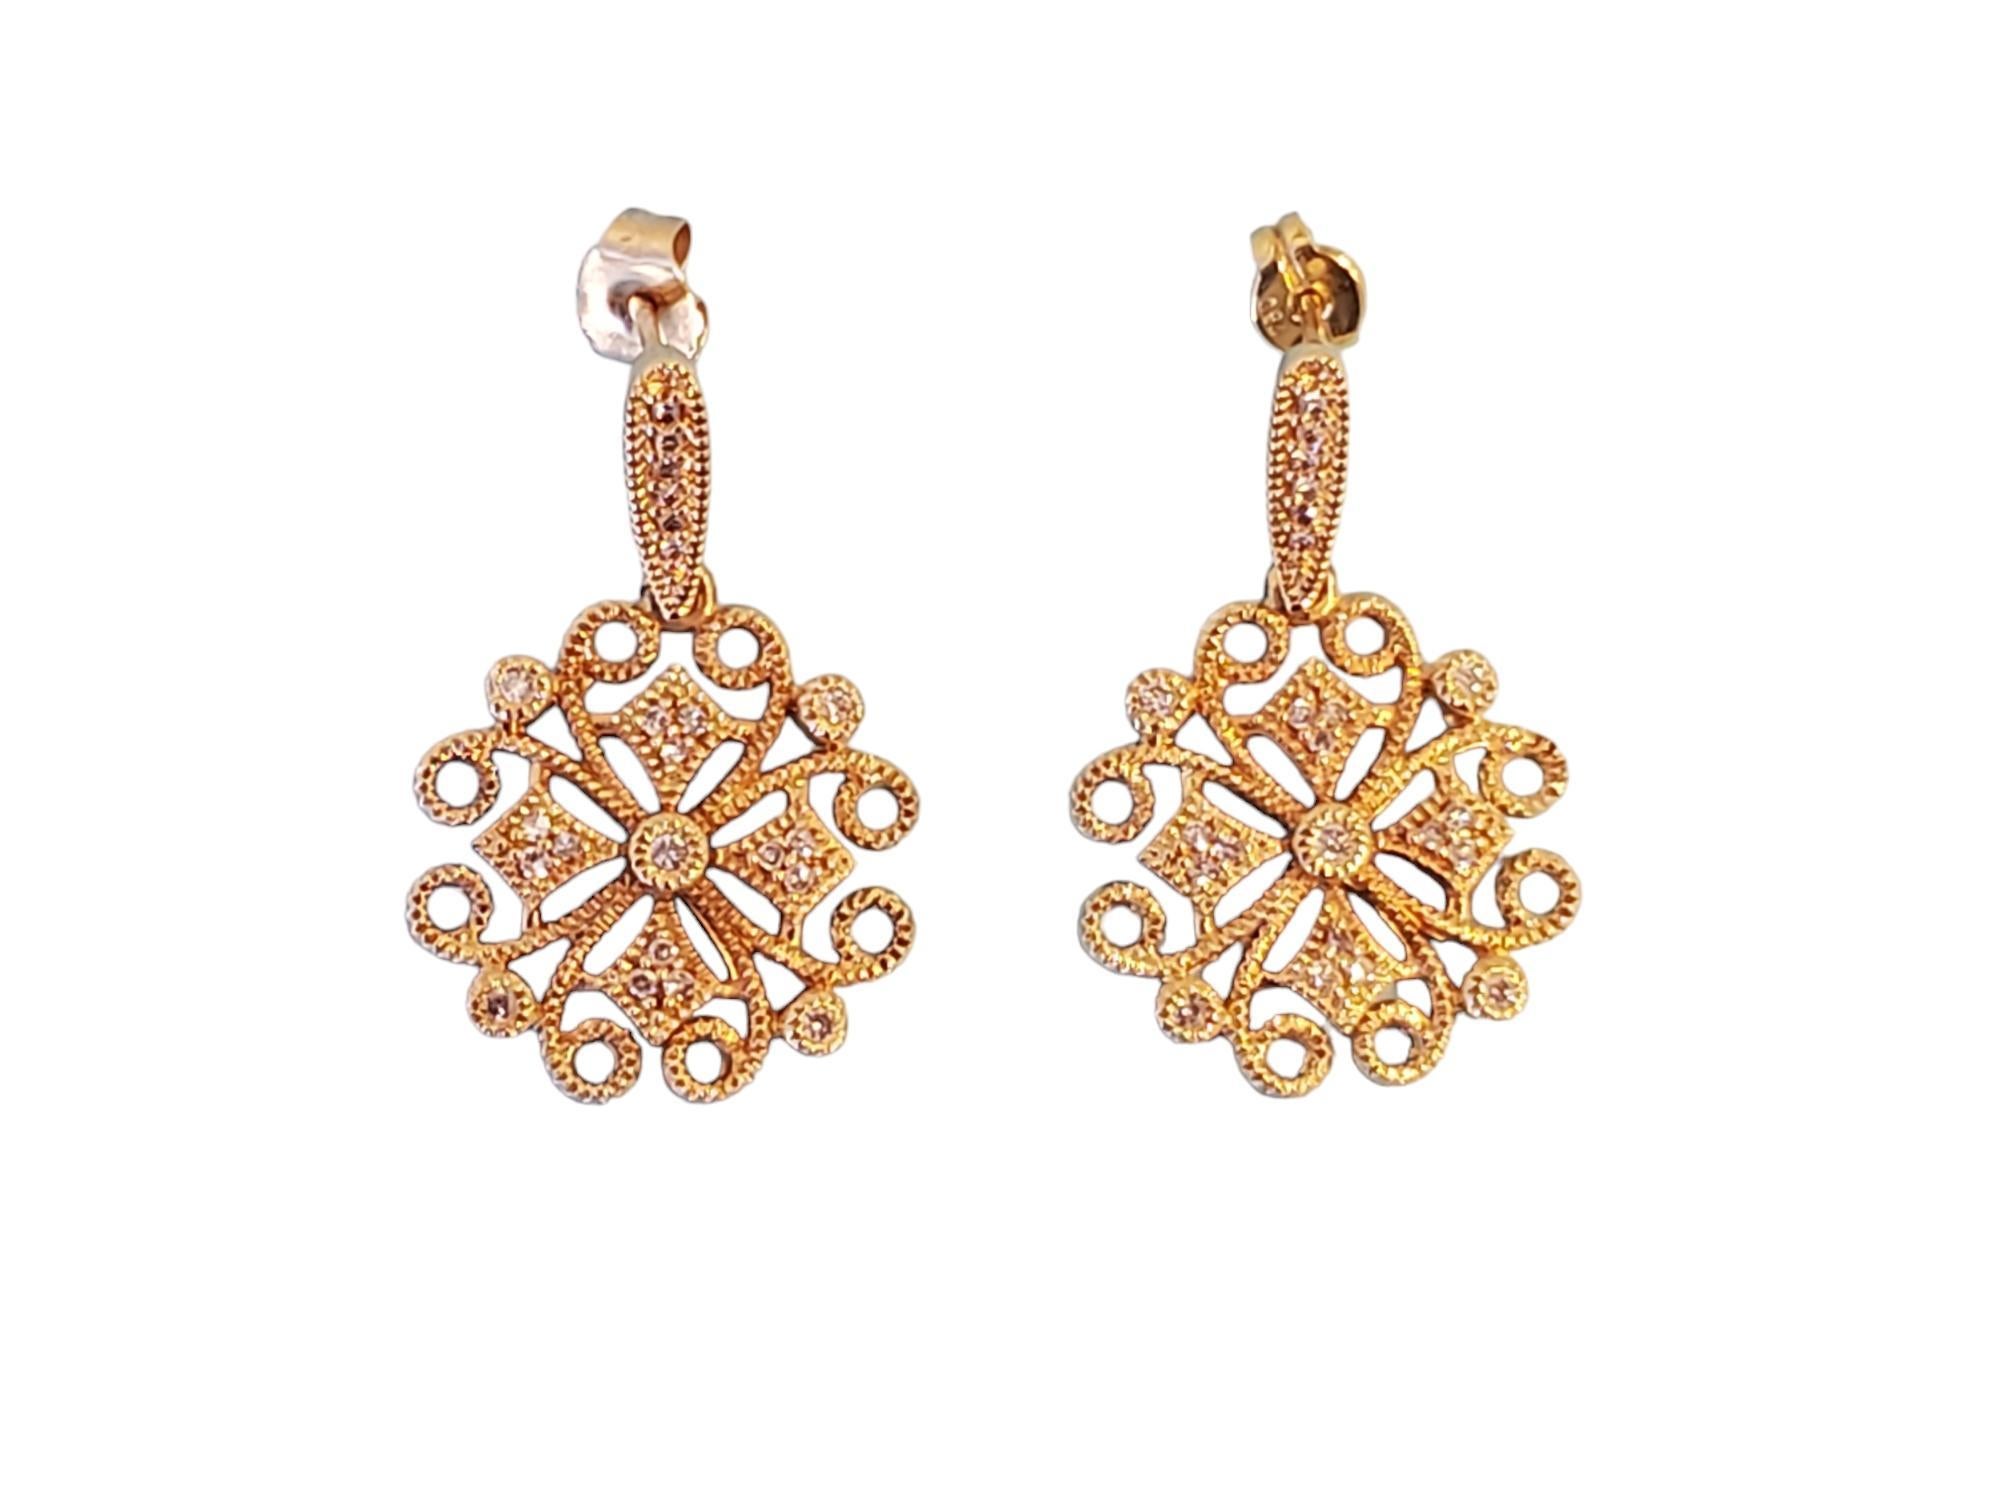 Listed are a pair of 18k yellow gold designer earrings with approximately .22tcw white clean diamonds. They are in excellent condition, unsure that they were even worn. They measure 30mm in length.